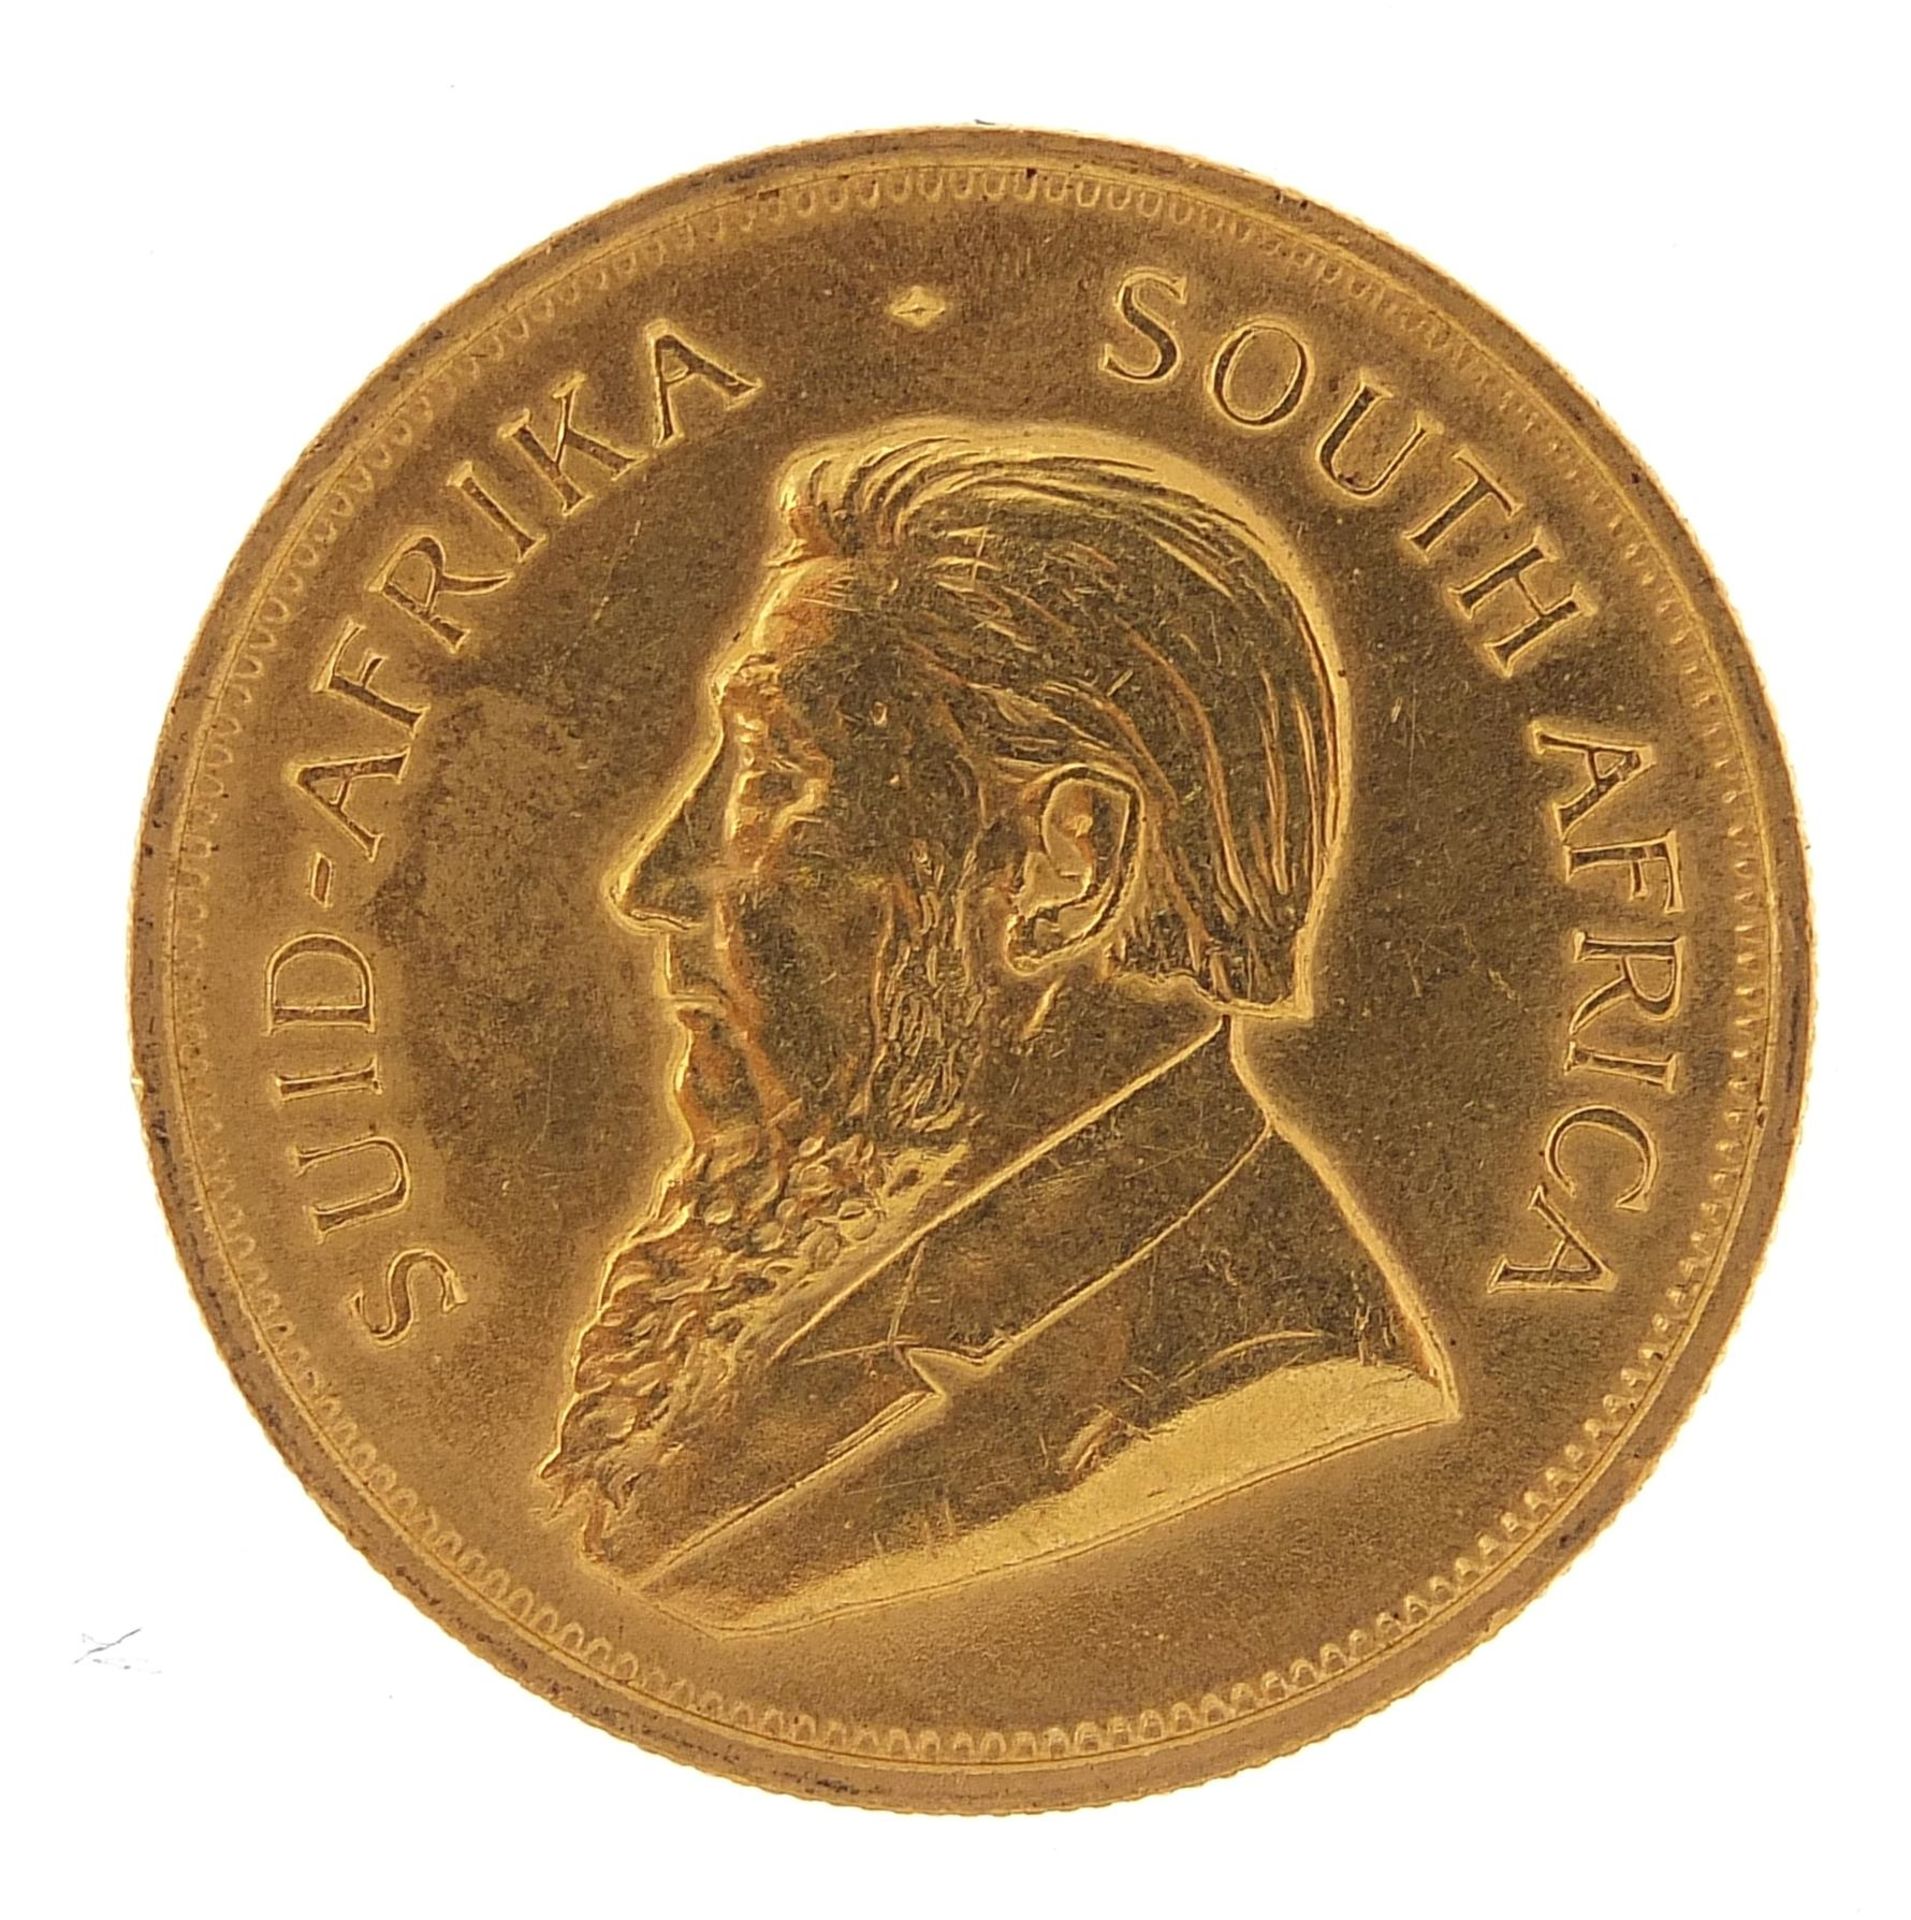 South African 1974 gold krugerrand - this lot is sold without buyer's premium - Image 2 of 3